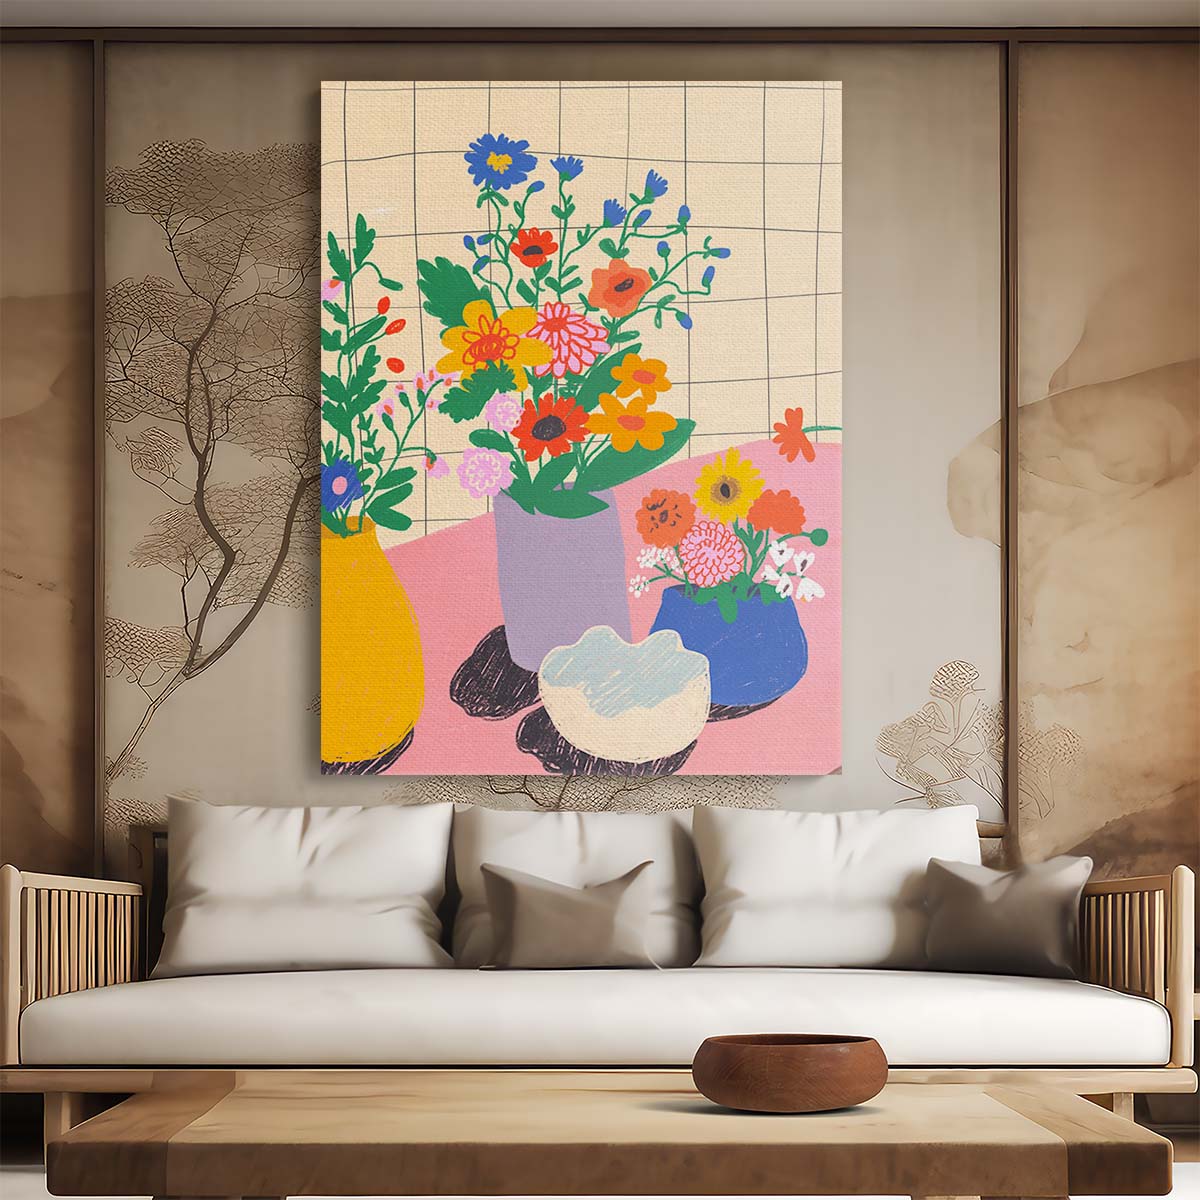 Colorful Botanical Illustration of Spring Flowers on Pink Table by Luxuriance Designs, made in USA